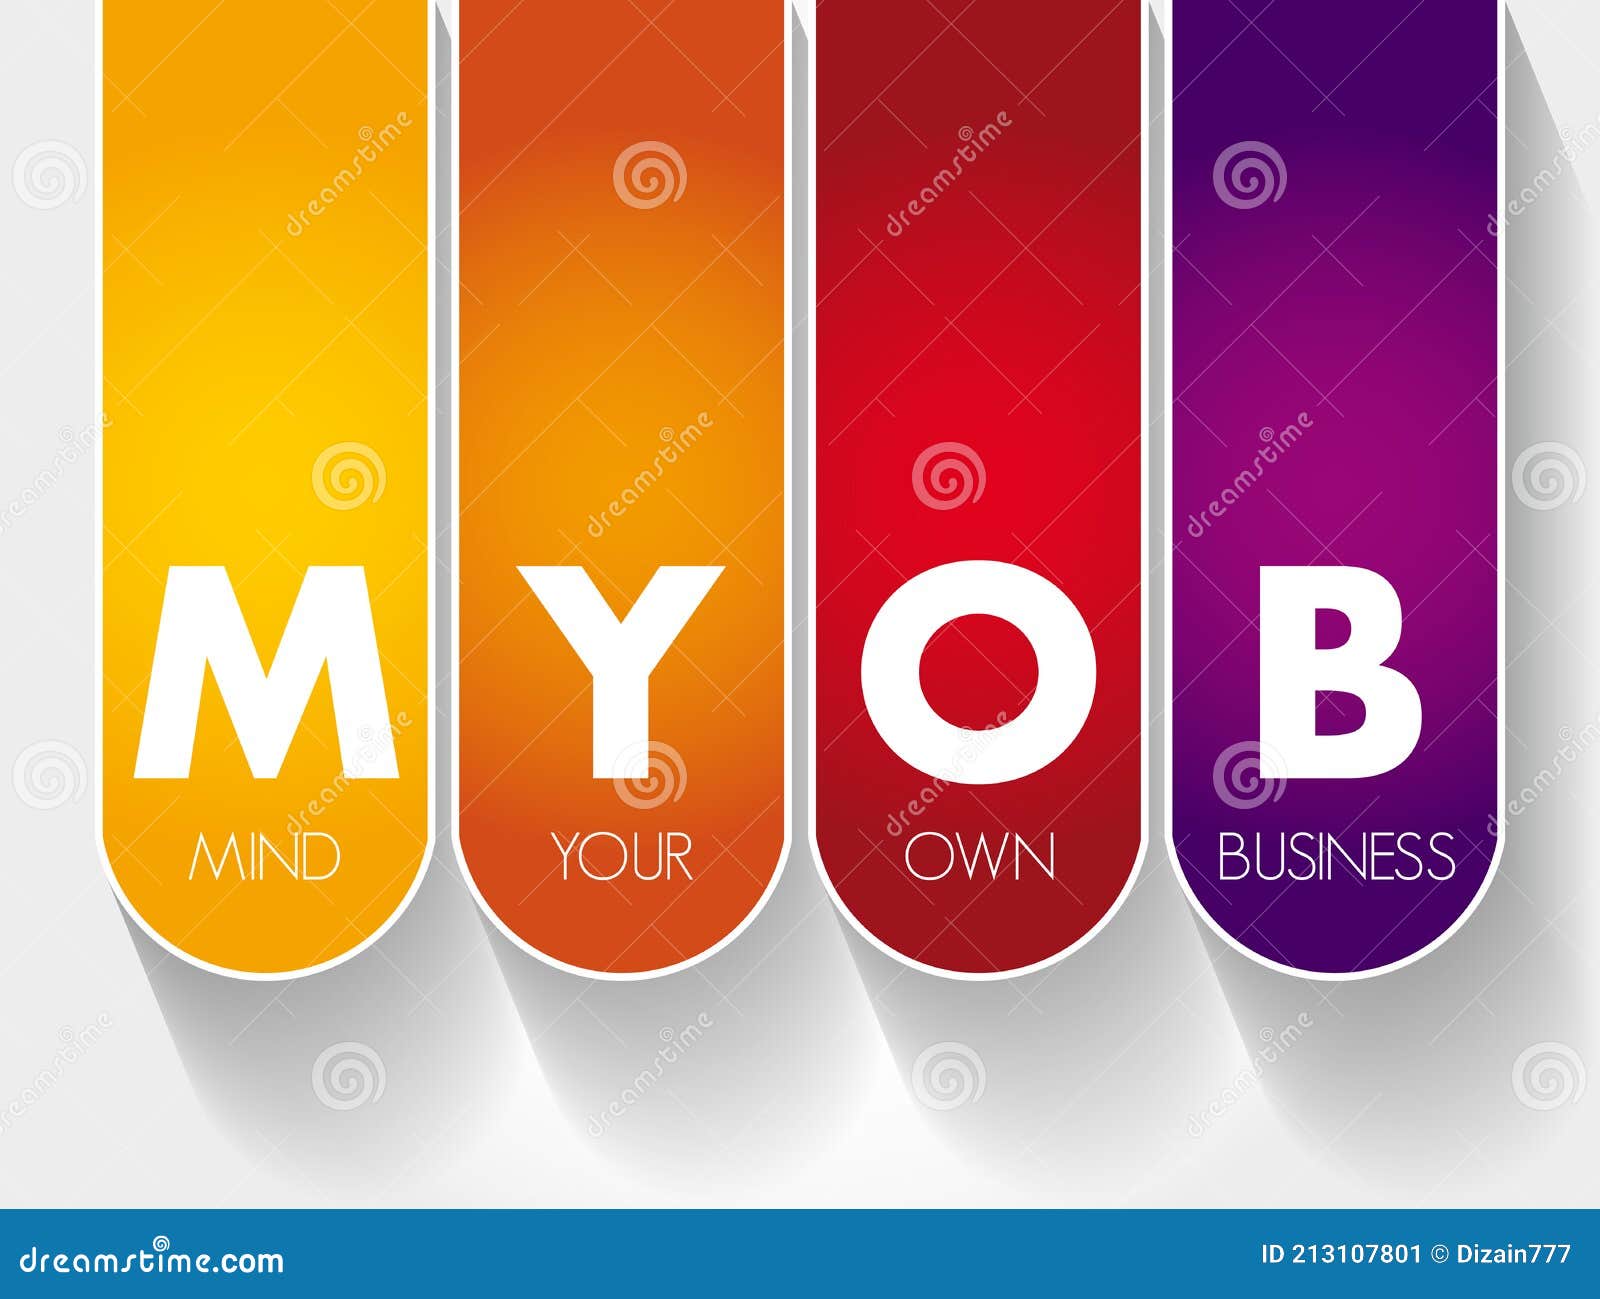 myob - mind your own business acronym, business concept background